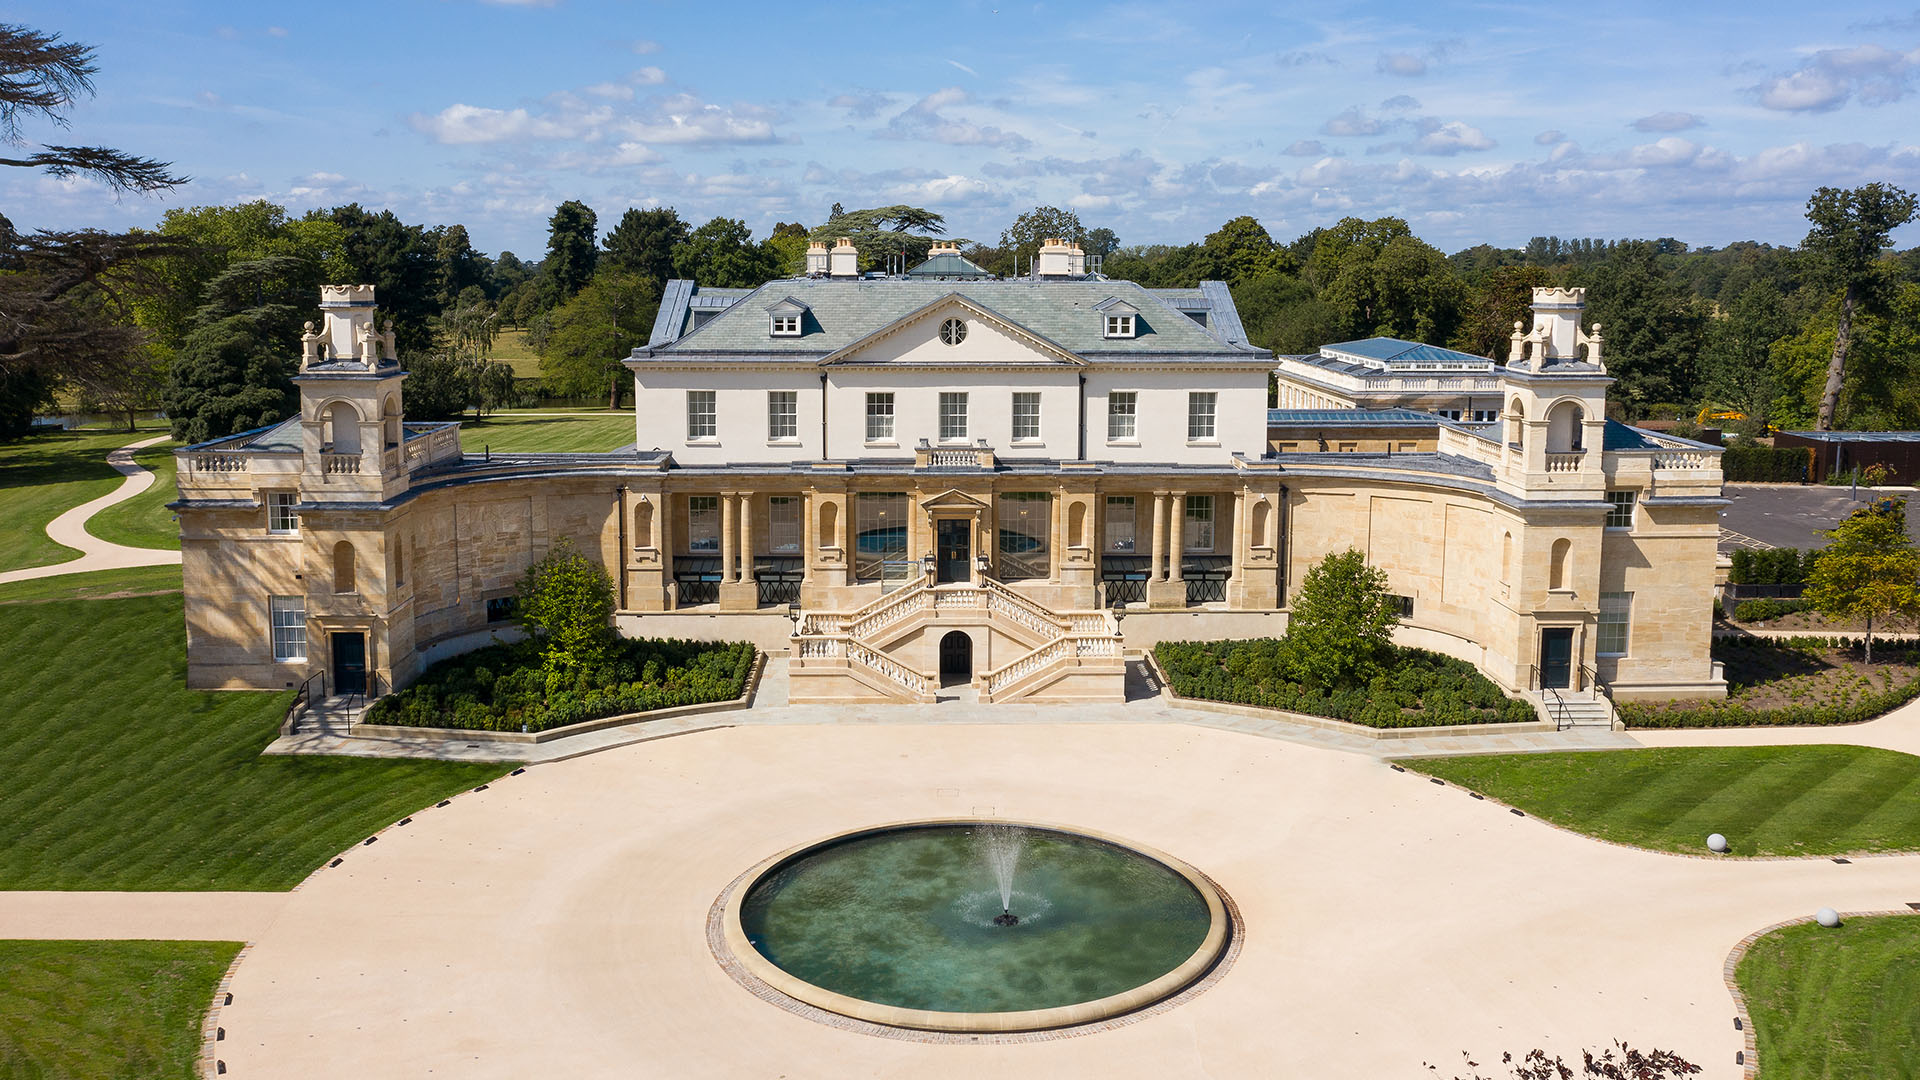 The Langley, a Luxury Collection Hotel, Buckinghamshire, England fountain and grounds